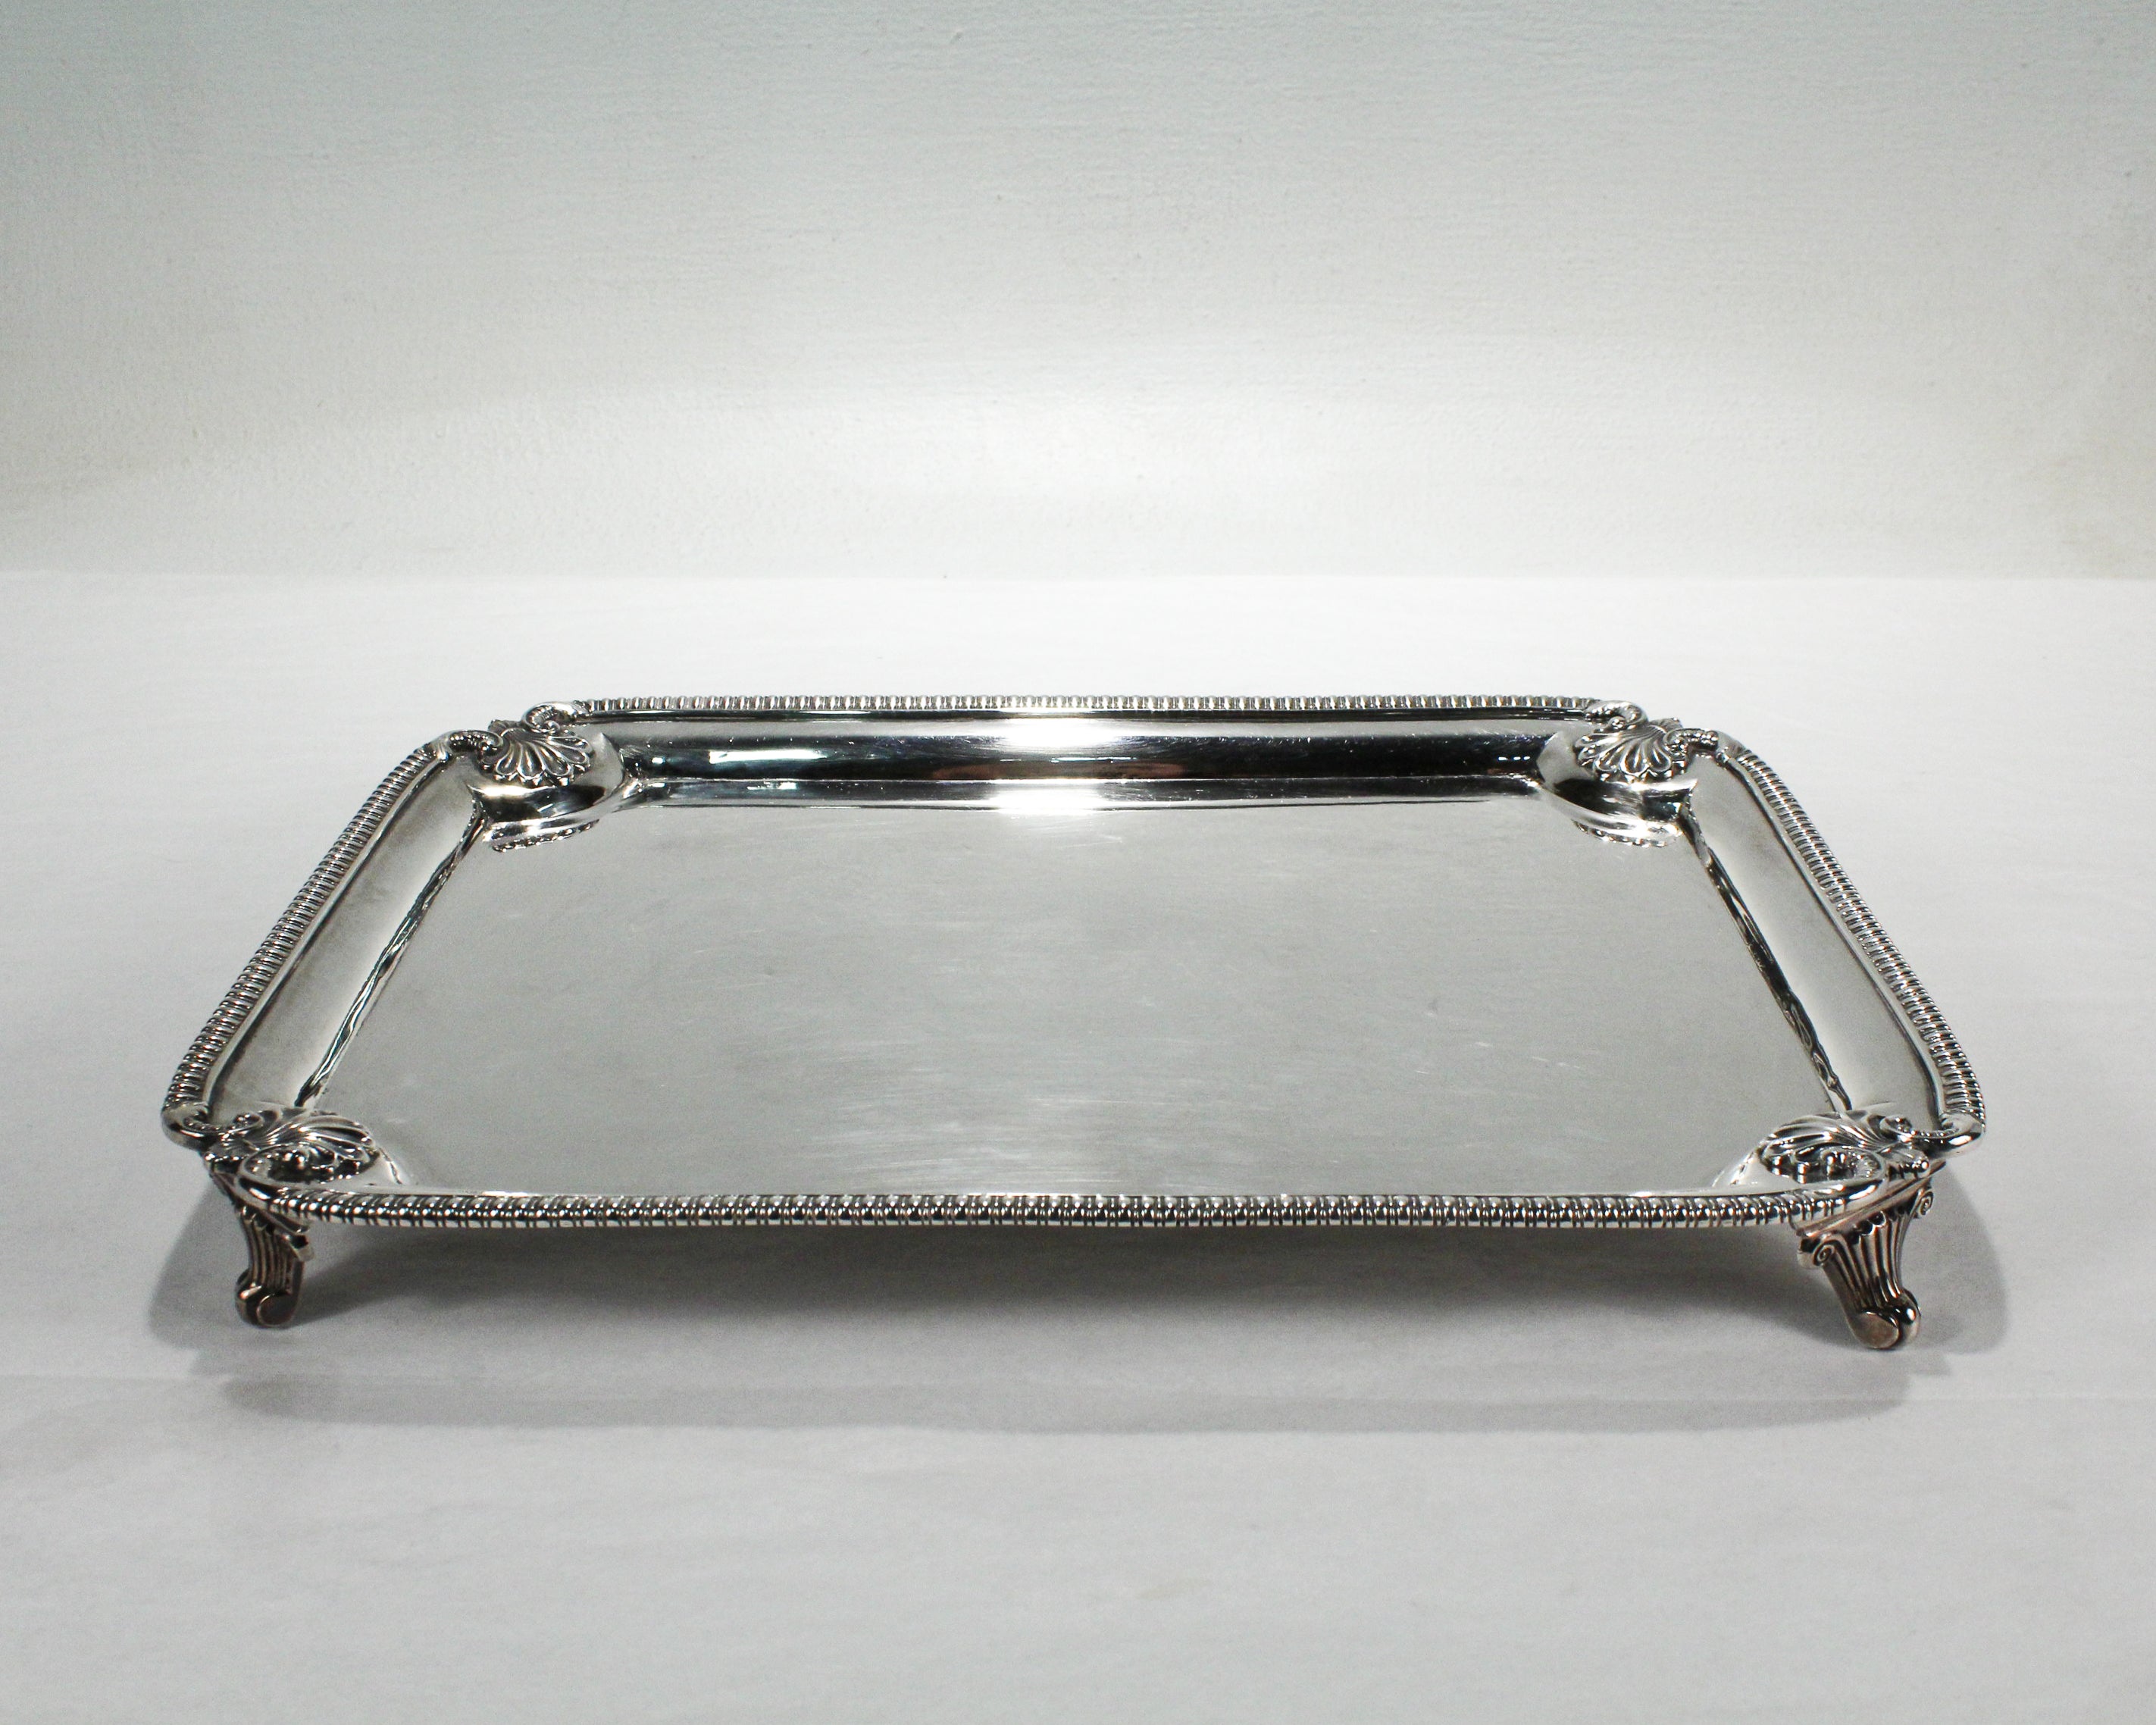 A fine antique silver salver or footed tray.

By Robert Hennell II and Samuel Hennell.

In sterling silver. 

Simply a great piece of antique English silver!

Date:
1810

Overall Condition:
It is in overall good, as-pictured, used estate